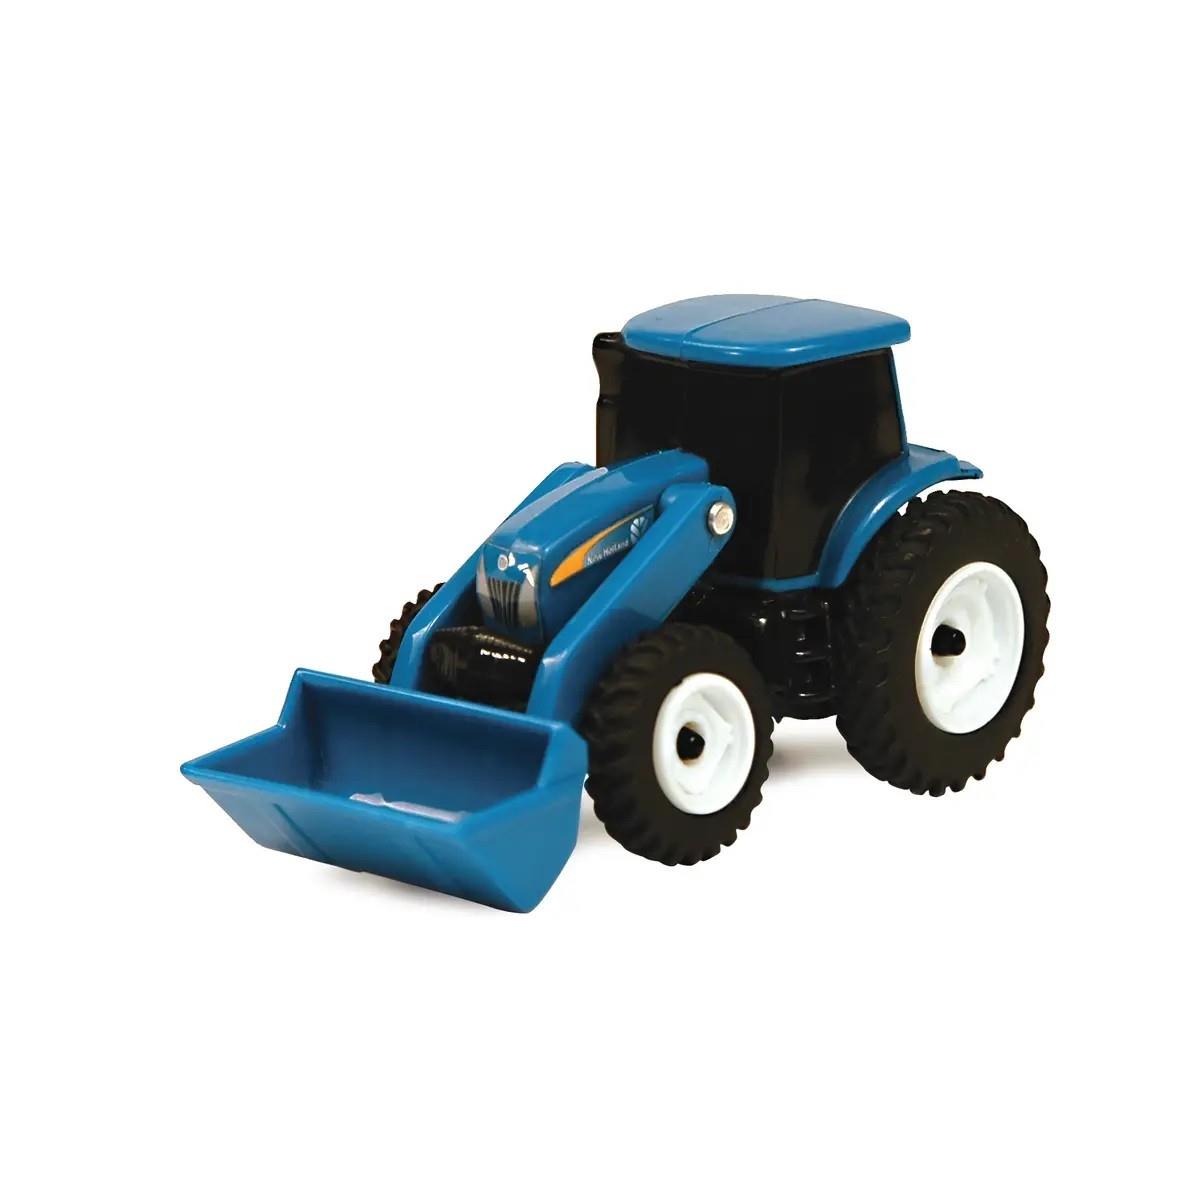 Tomy Ertl New Holland Tractor with Loader (46575)